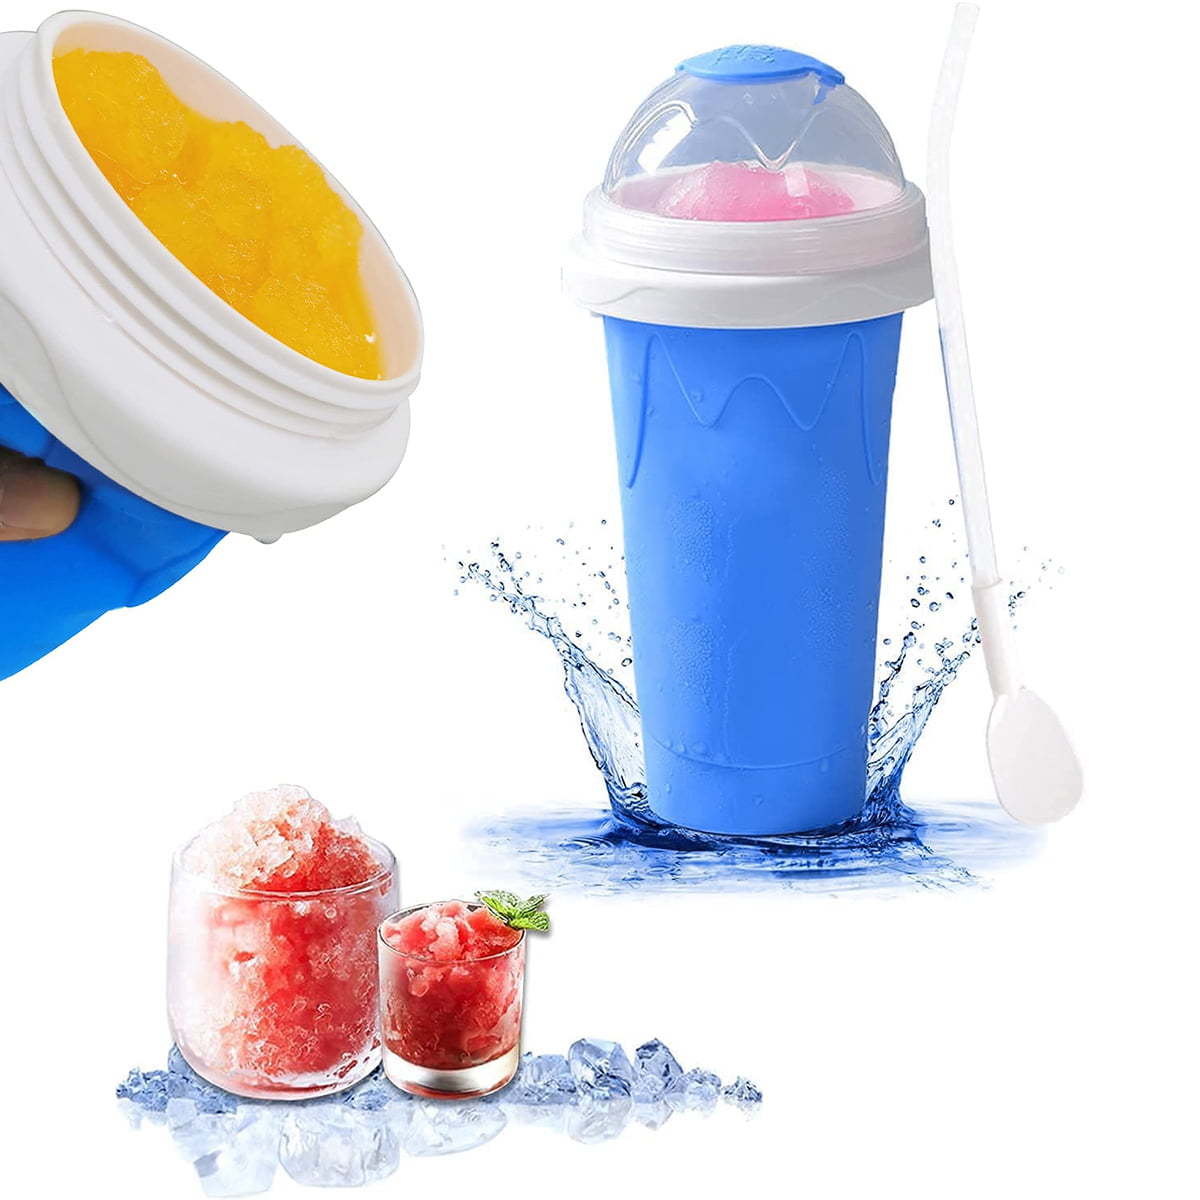 Magic Slushy Maker Squeeze Cup Slushy Maker Freeze Mug Milkshake Smoothie Mug,DIY Homemade Smoothie Cup Frozen Drink Cup,Portable Squeeze Ice Cup For Everyone Blue 